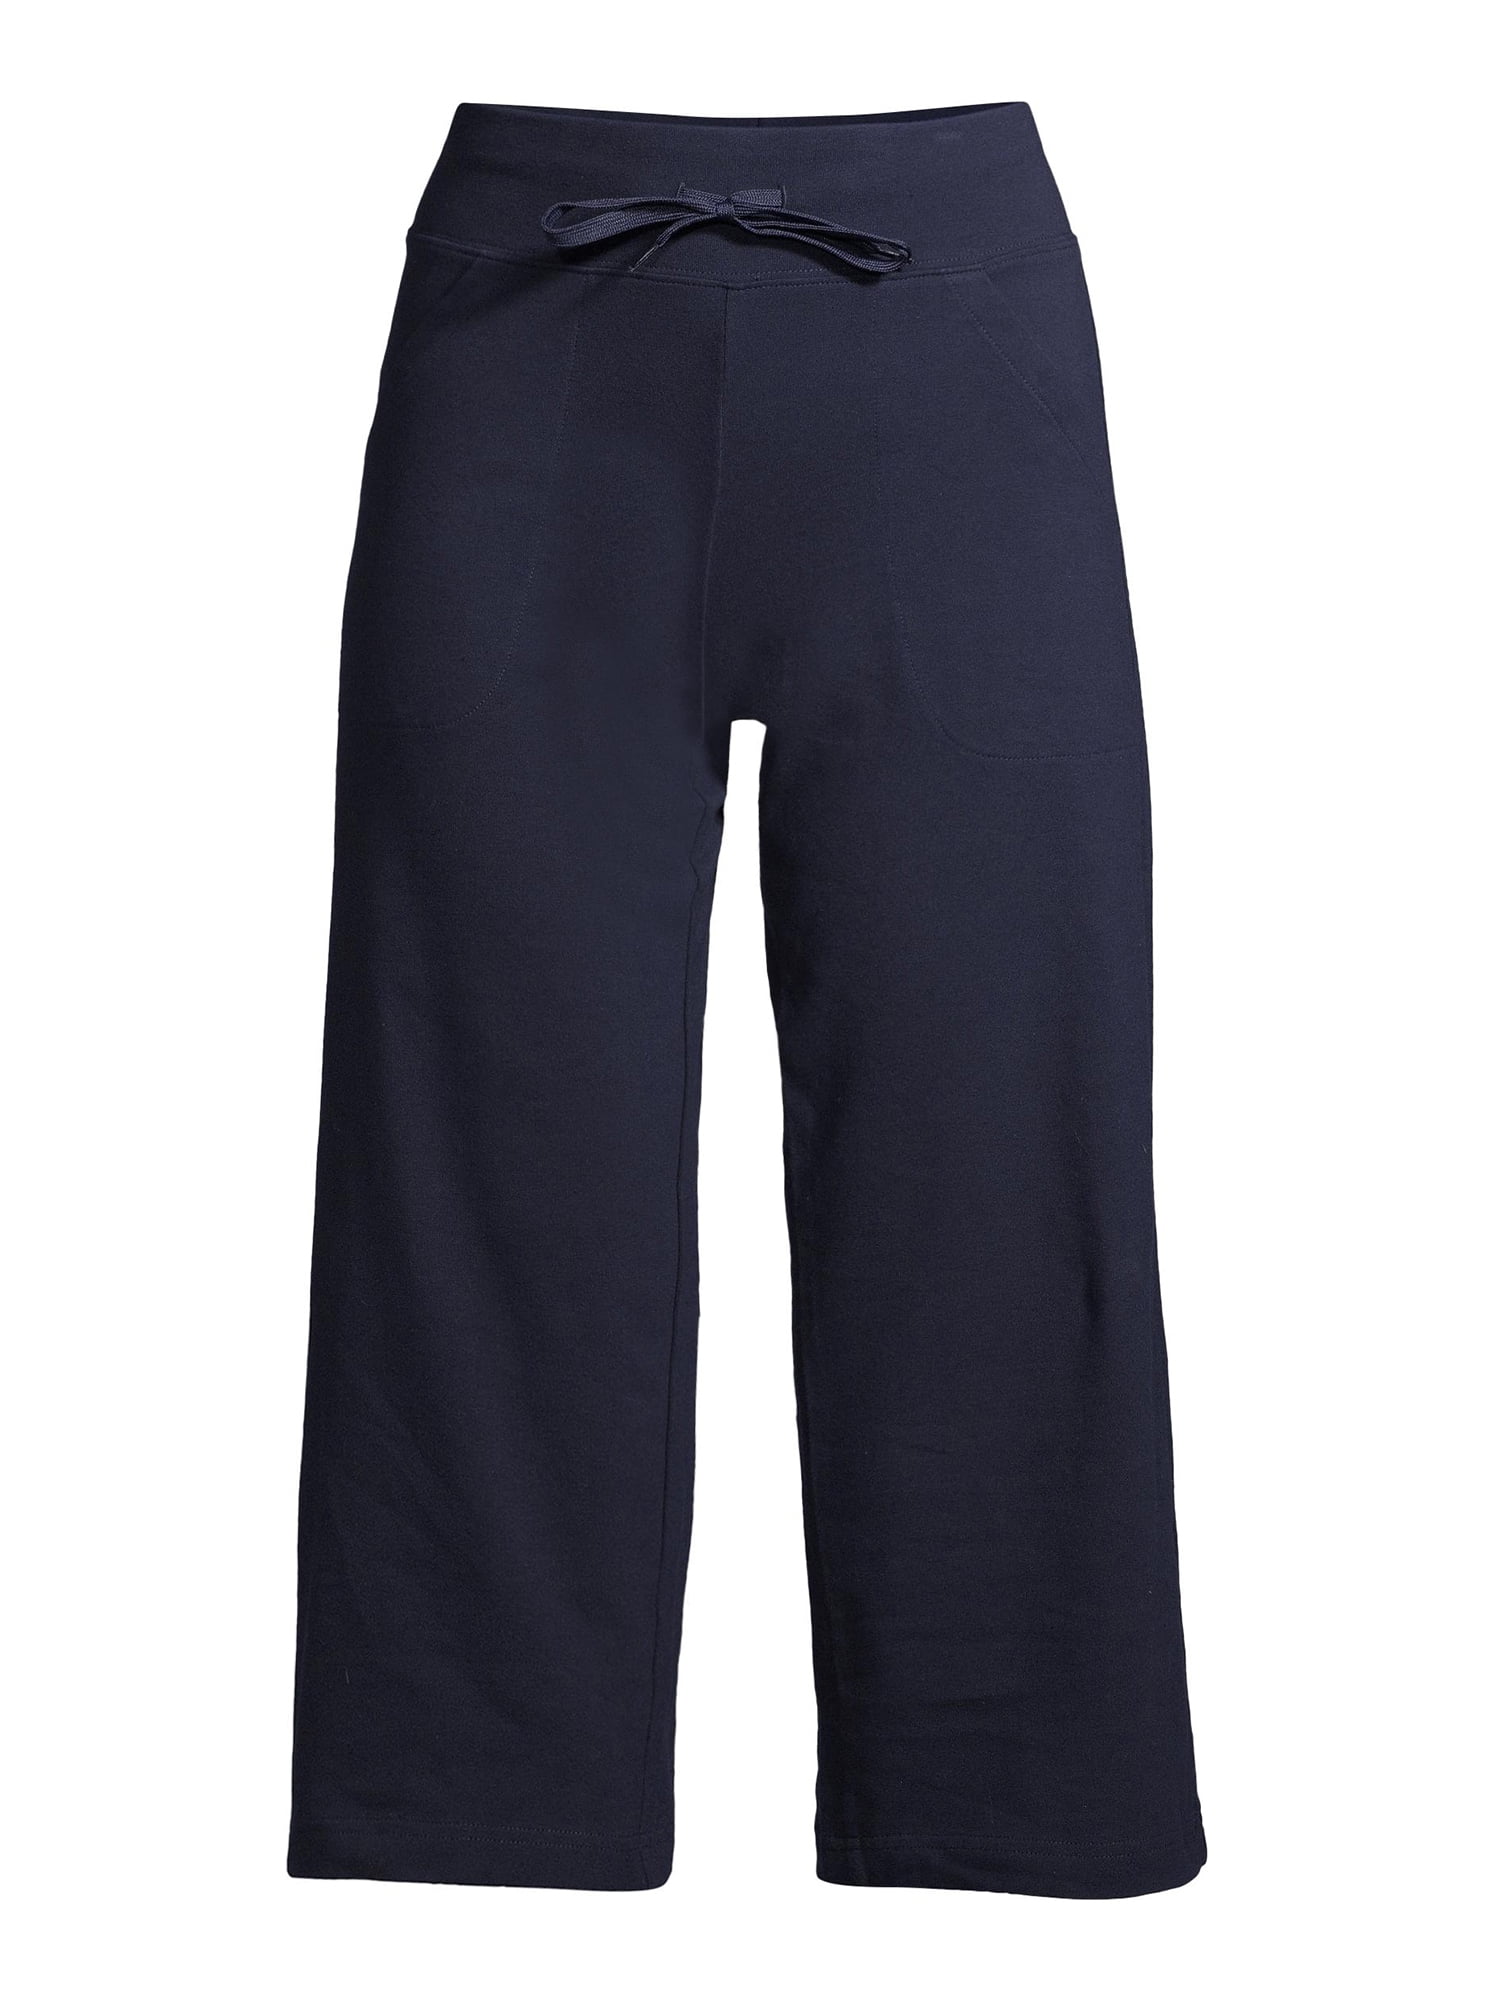 Athletic Works Women's Athleisure Relaxed Capri with Pockets - Walmart.com